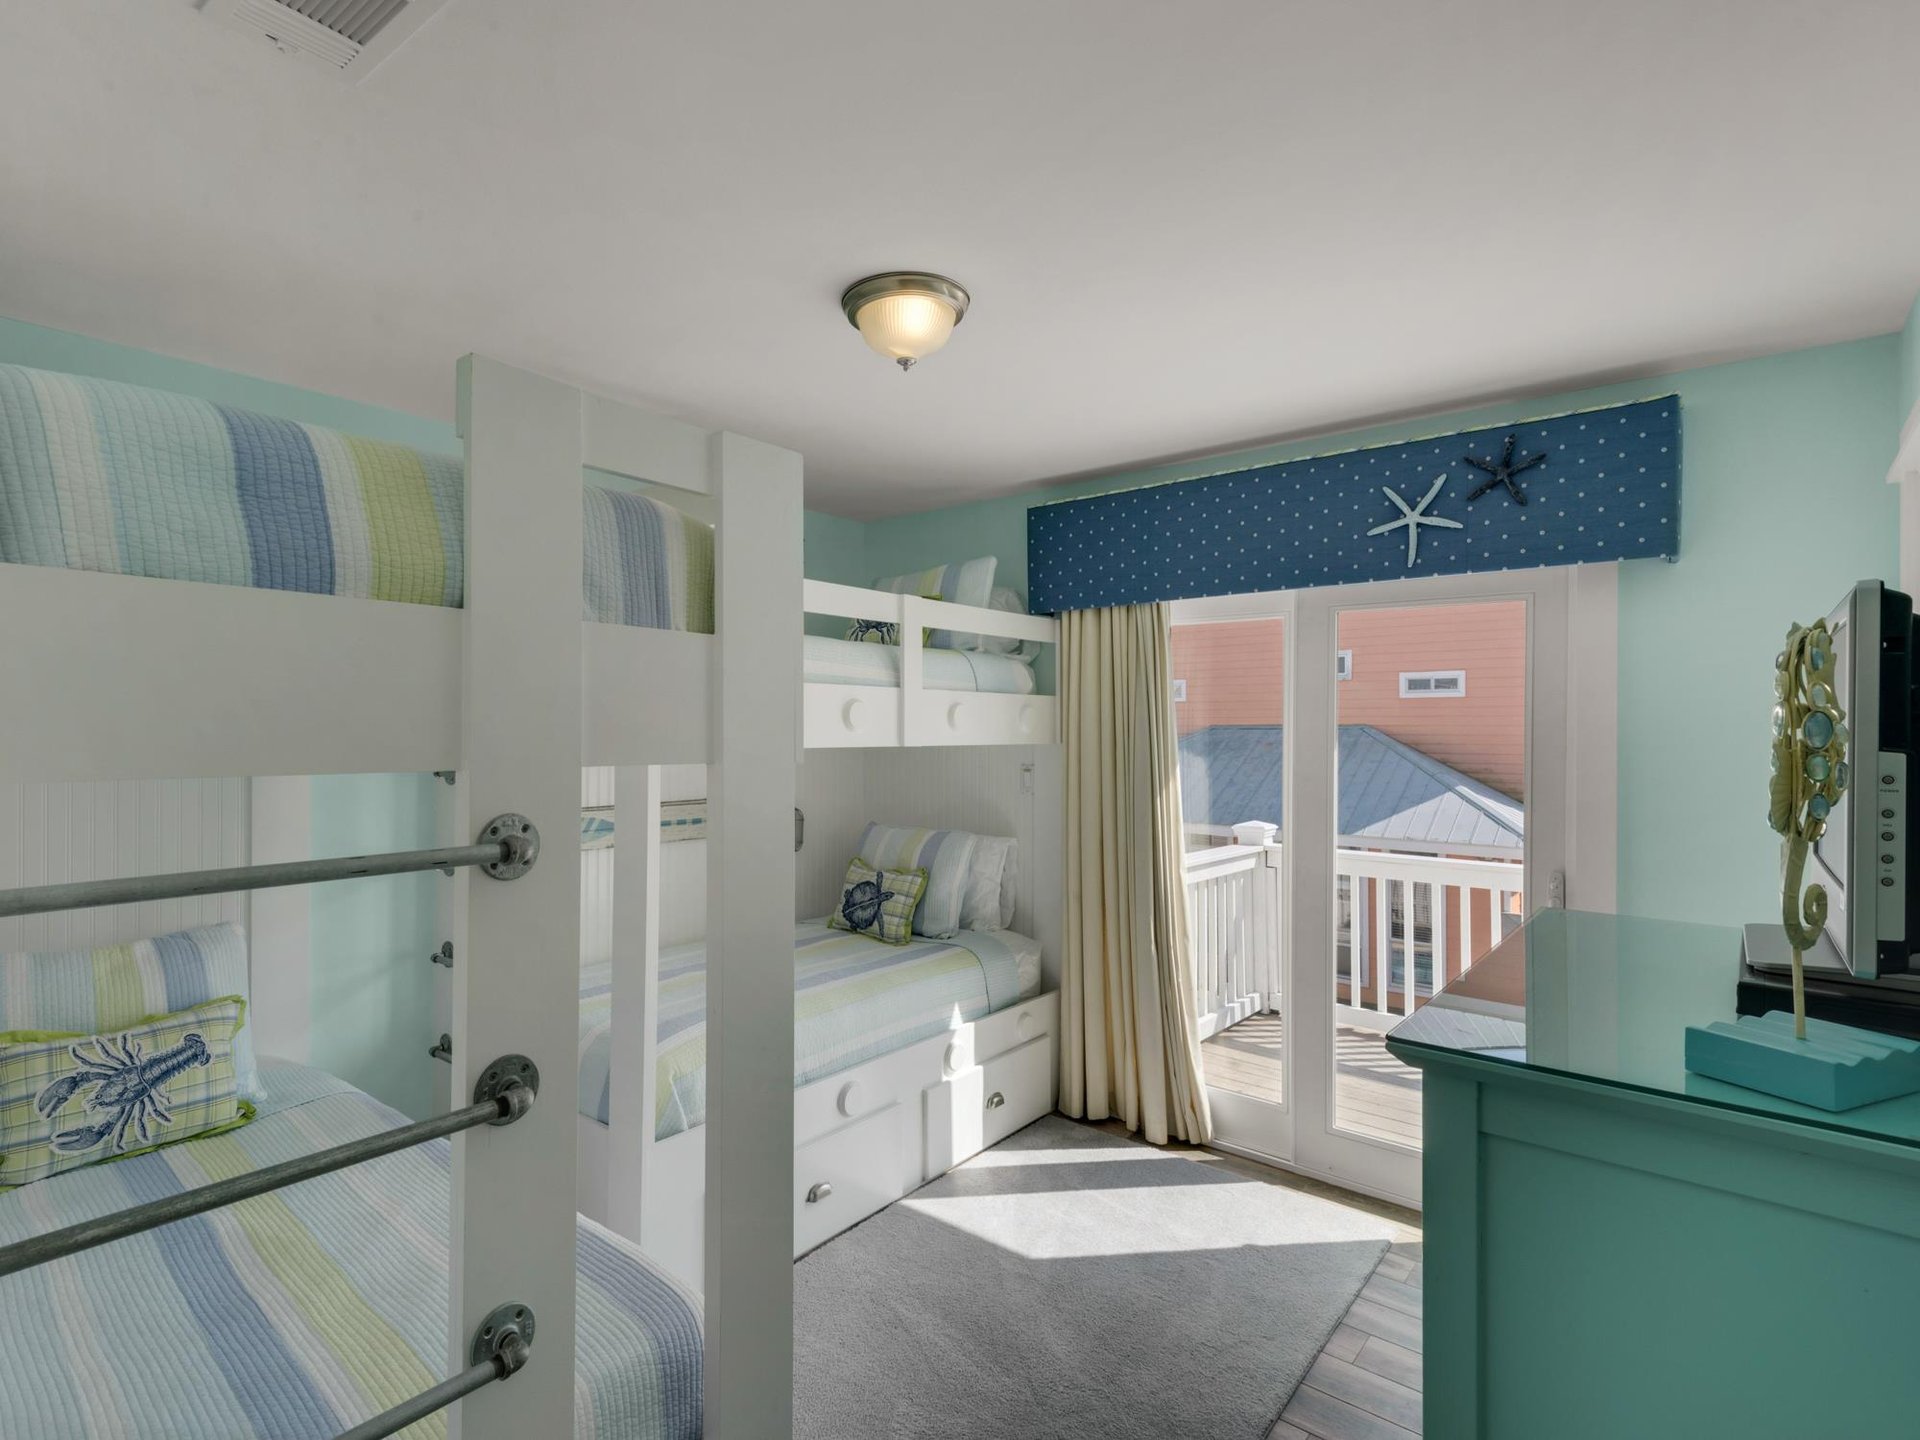 Bunkroom with Flat Screen TV and Balcony Access